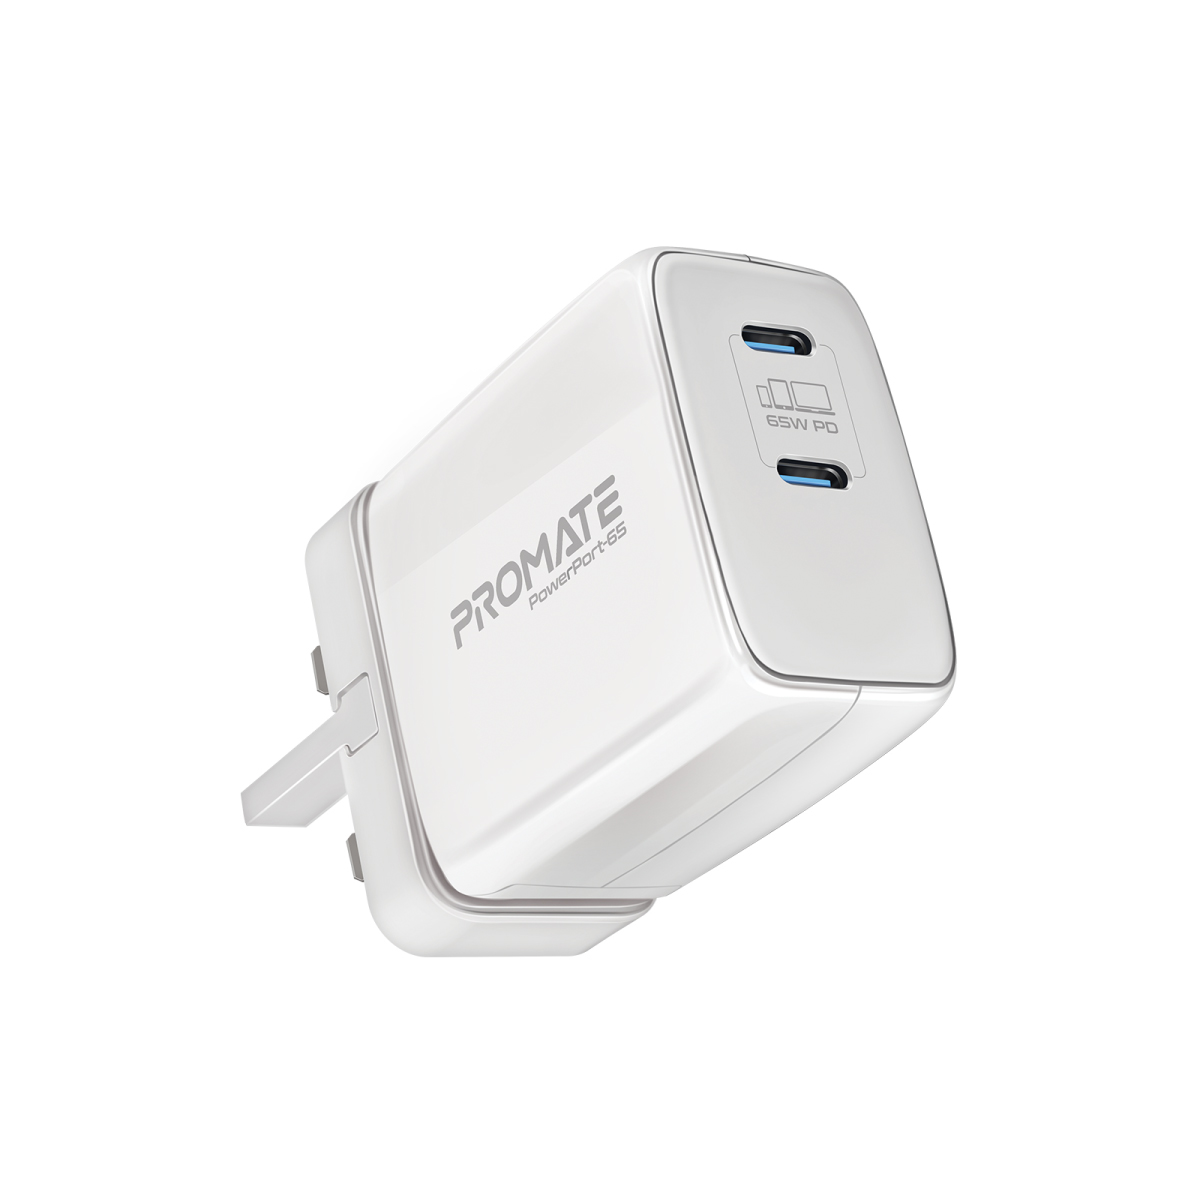 Promate 65W USB-C Power Delivery GaN Charger, Universal Powerful GaN Tech Fast Charger with 2 Type-C Port, Adaptive Charging and Over-Charging Protection for USB-C Powered Devices, POWERPORT-65.UK-WT